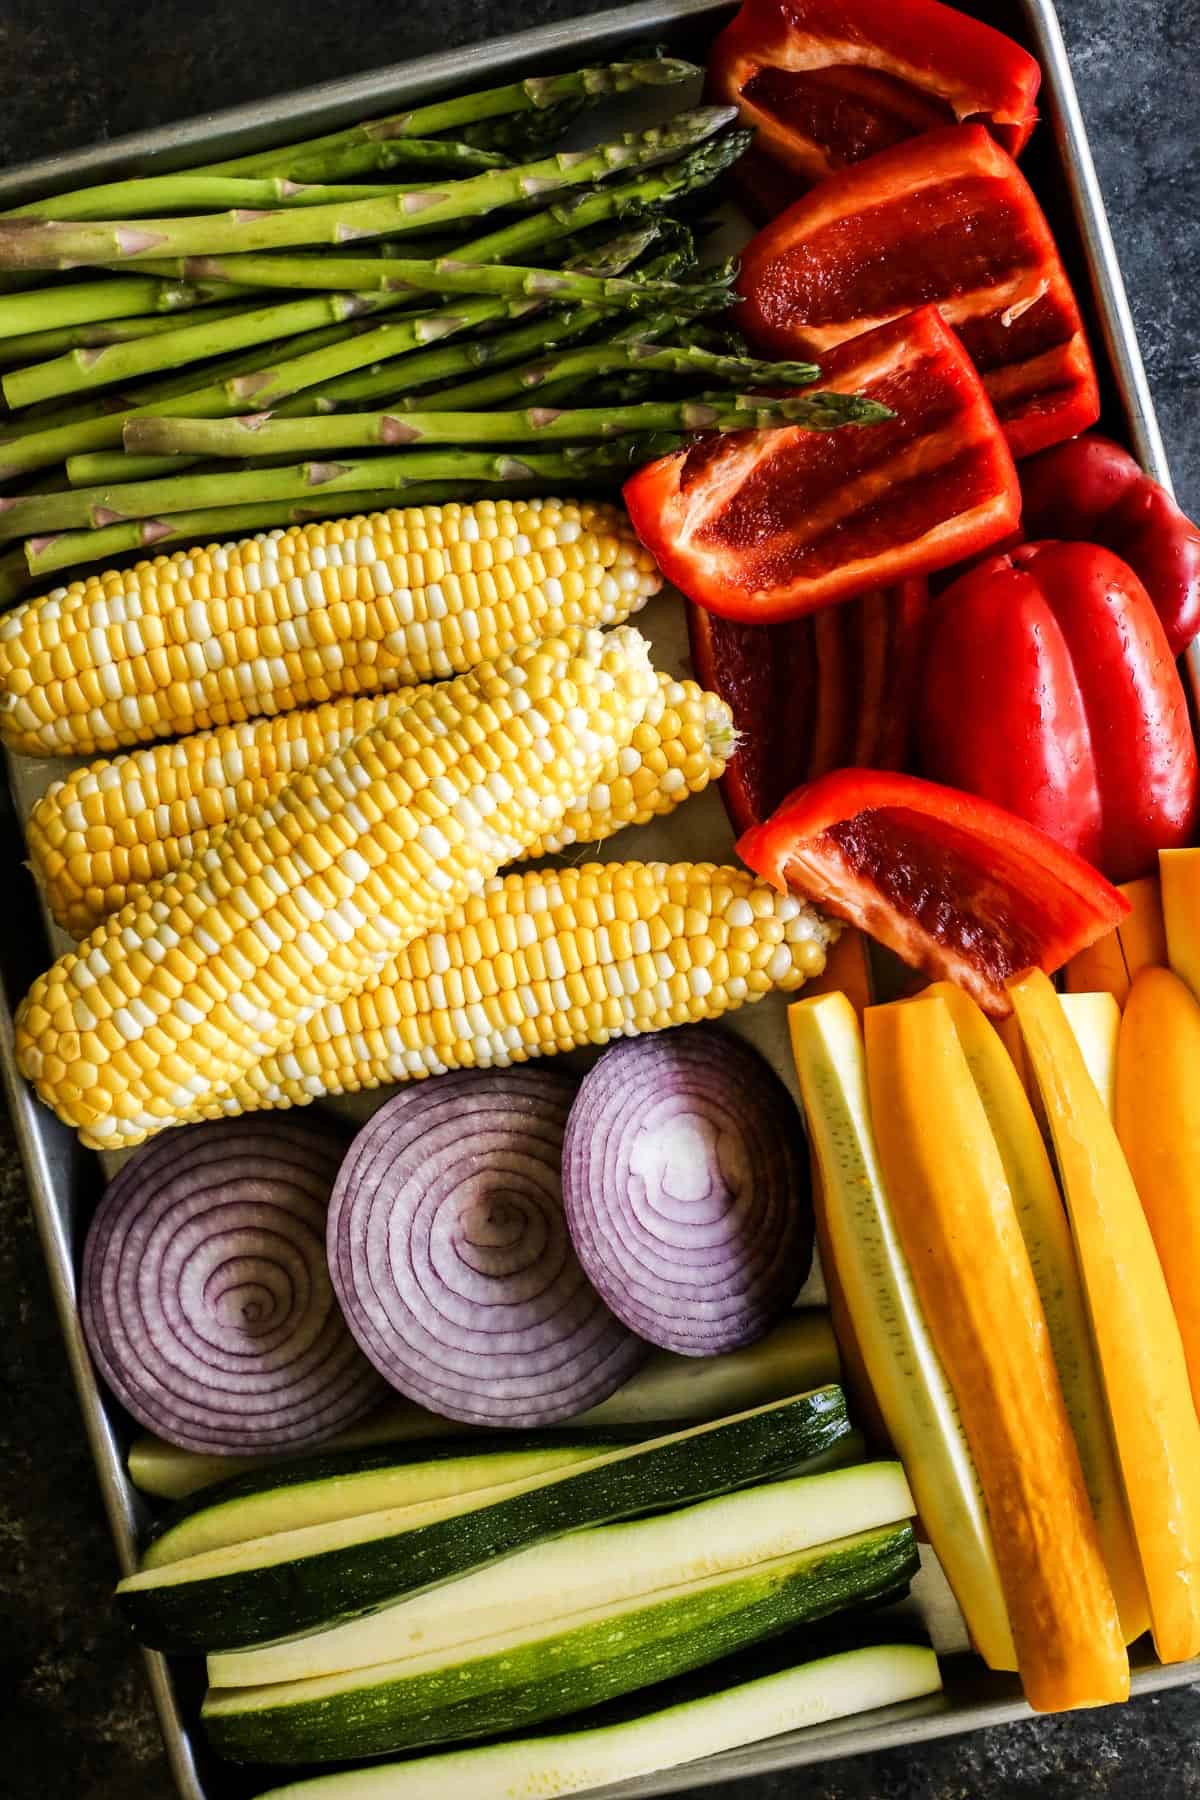 fresh vegetables on a rimmed pan: asparagus, sweet corn, and sliced red pepper, yellow squash, zucchini, and red onion